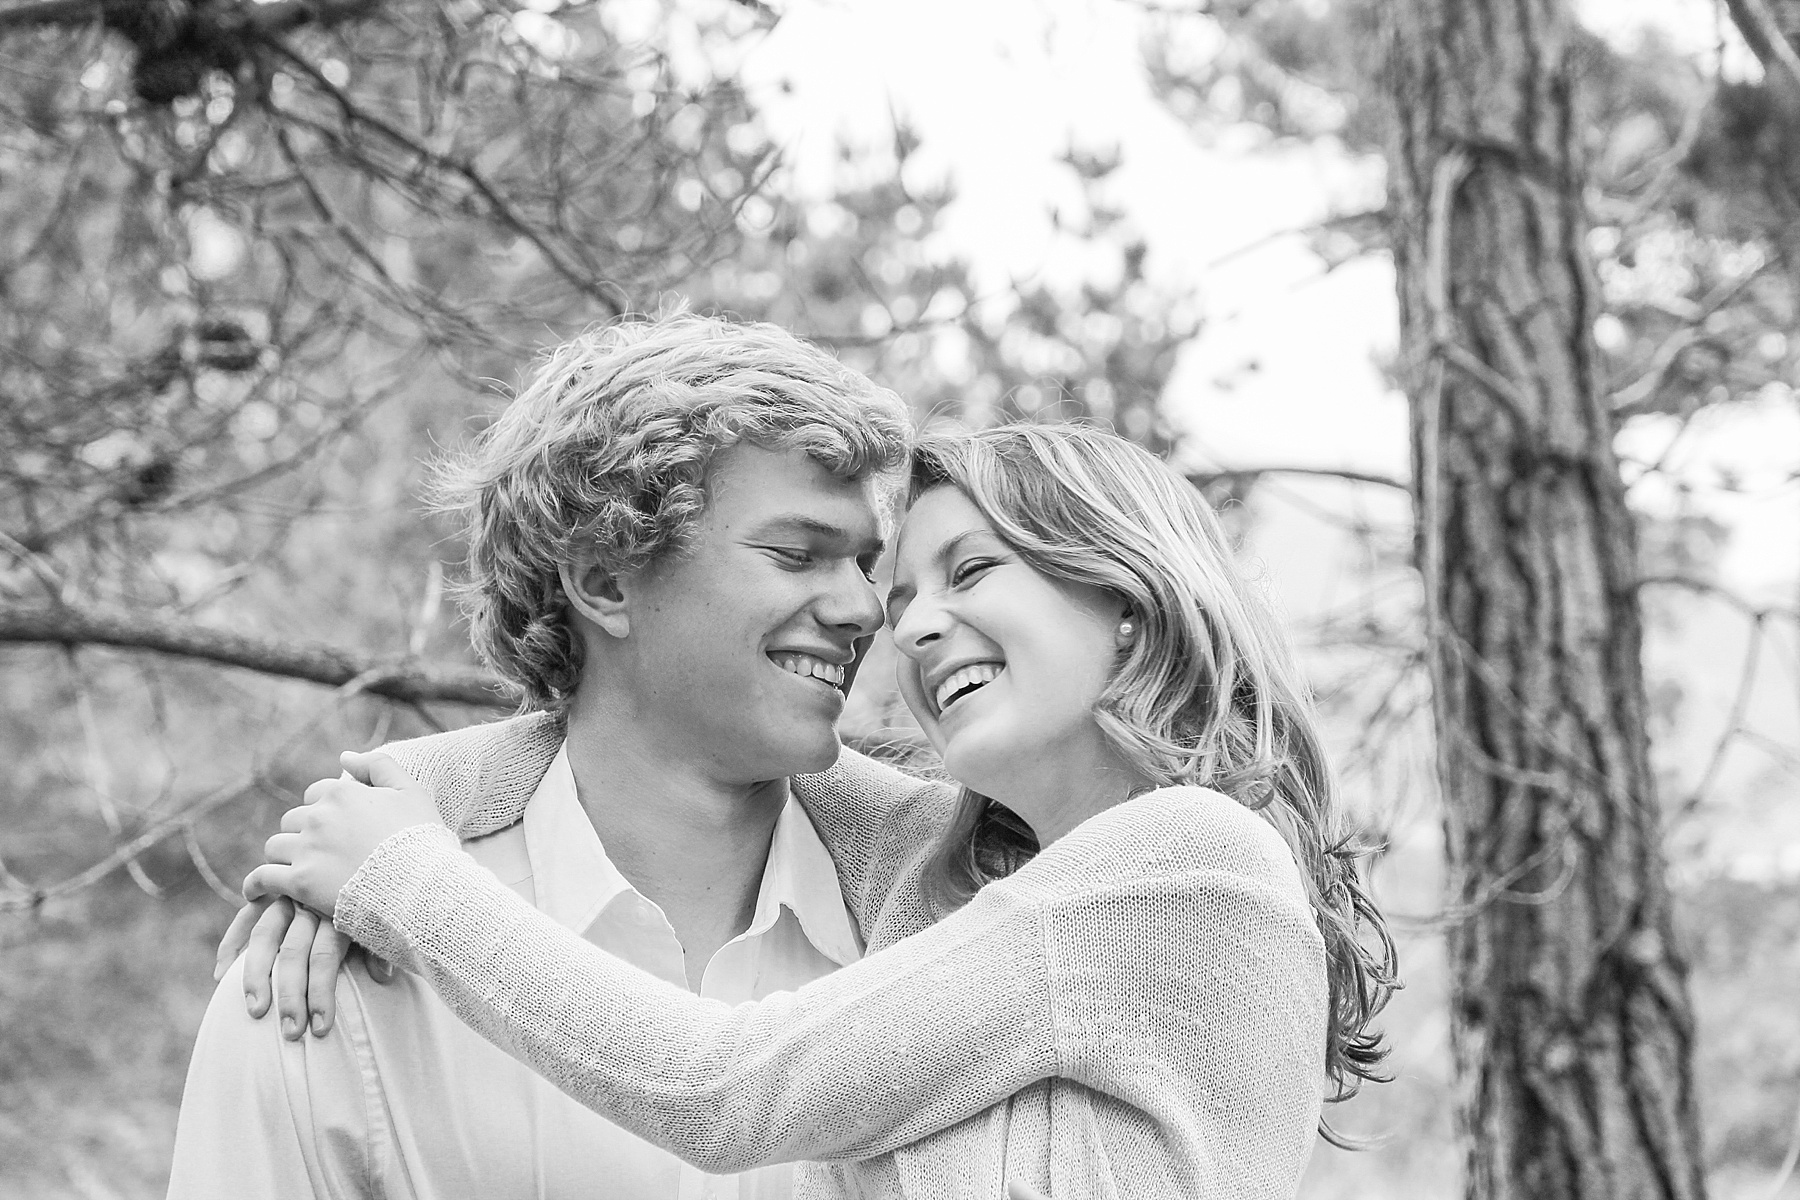 Willow Vogt Photography, Our Story Pt. II, Proposal, K&W, Waco Photographer, Texas Photographer